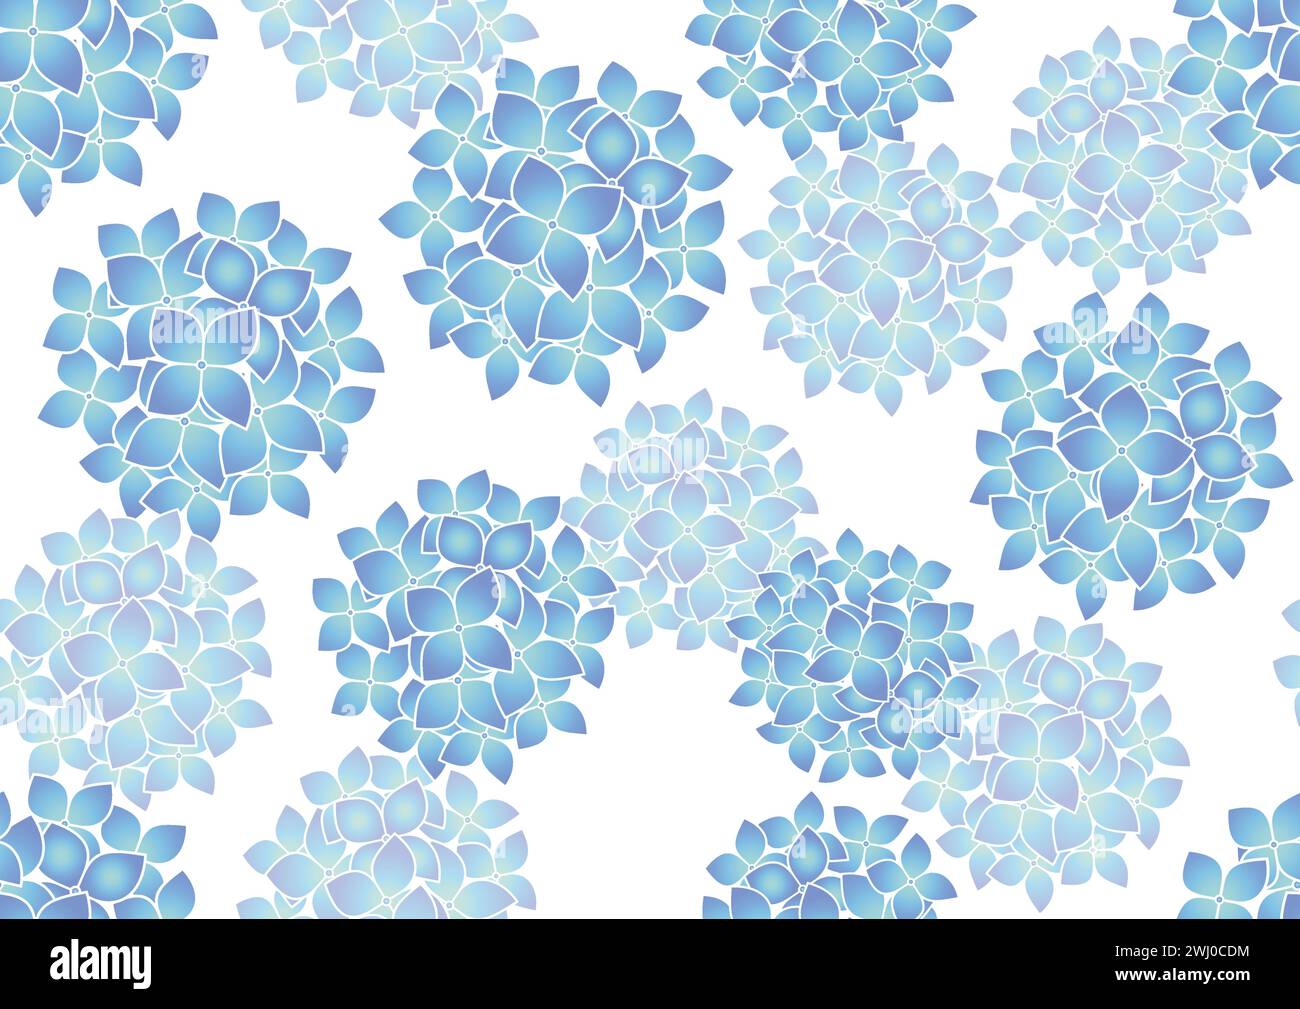 Seamless Blue Hydrangea Floral Pattern Vector Illustration Isolated On A White Background. Horizontally And Vertically Repeatable. Stock Vector